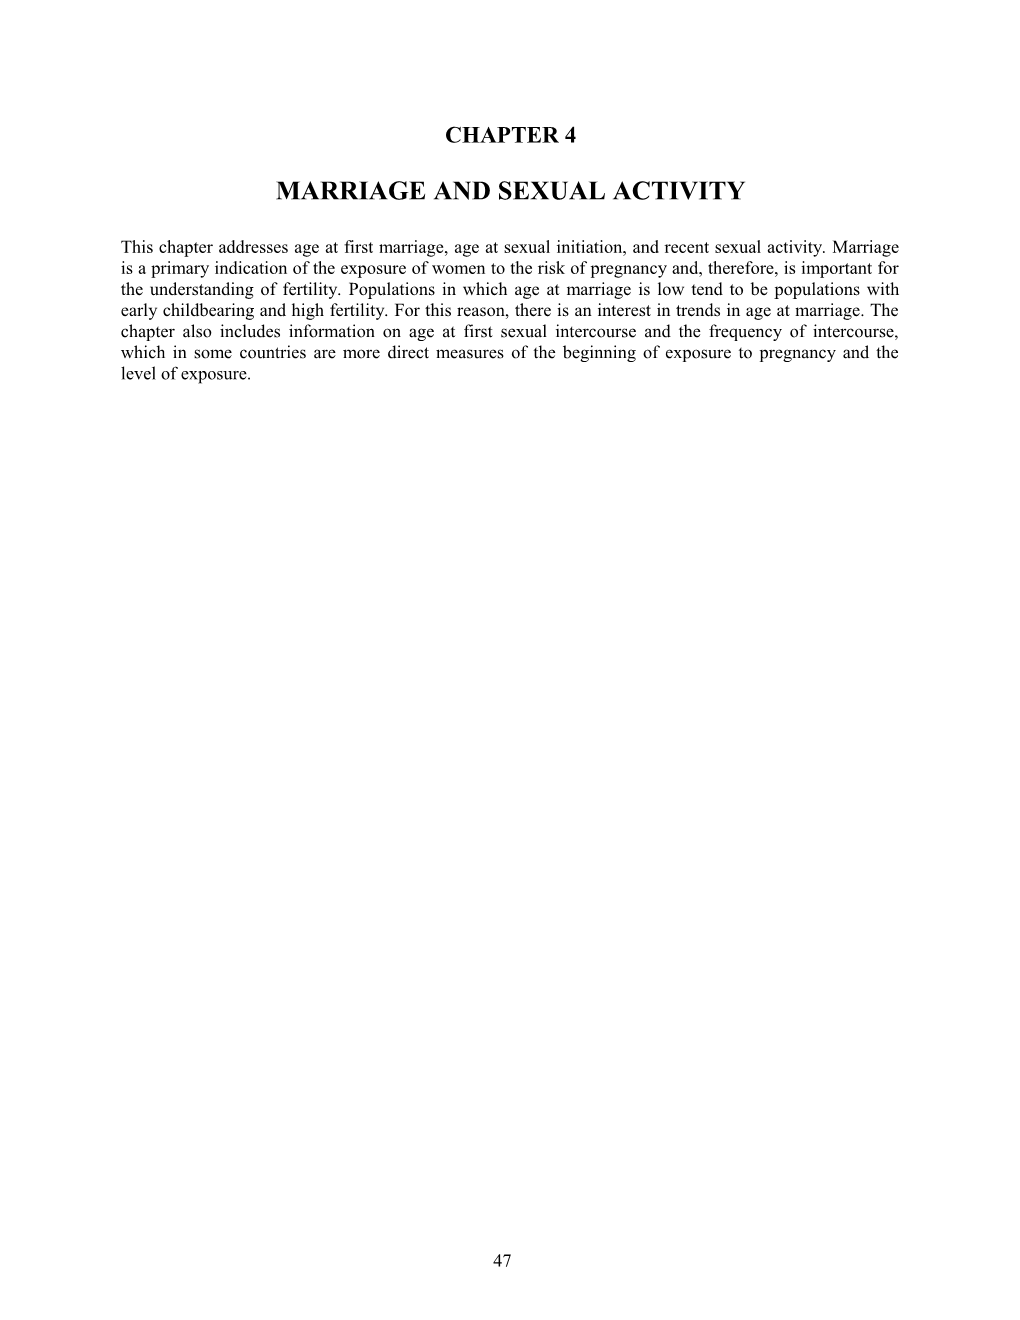 Marriage and Sexual Activity